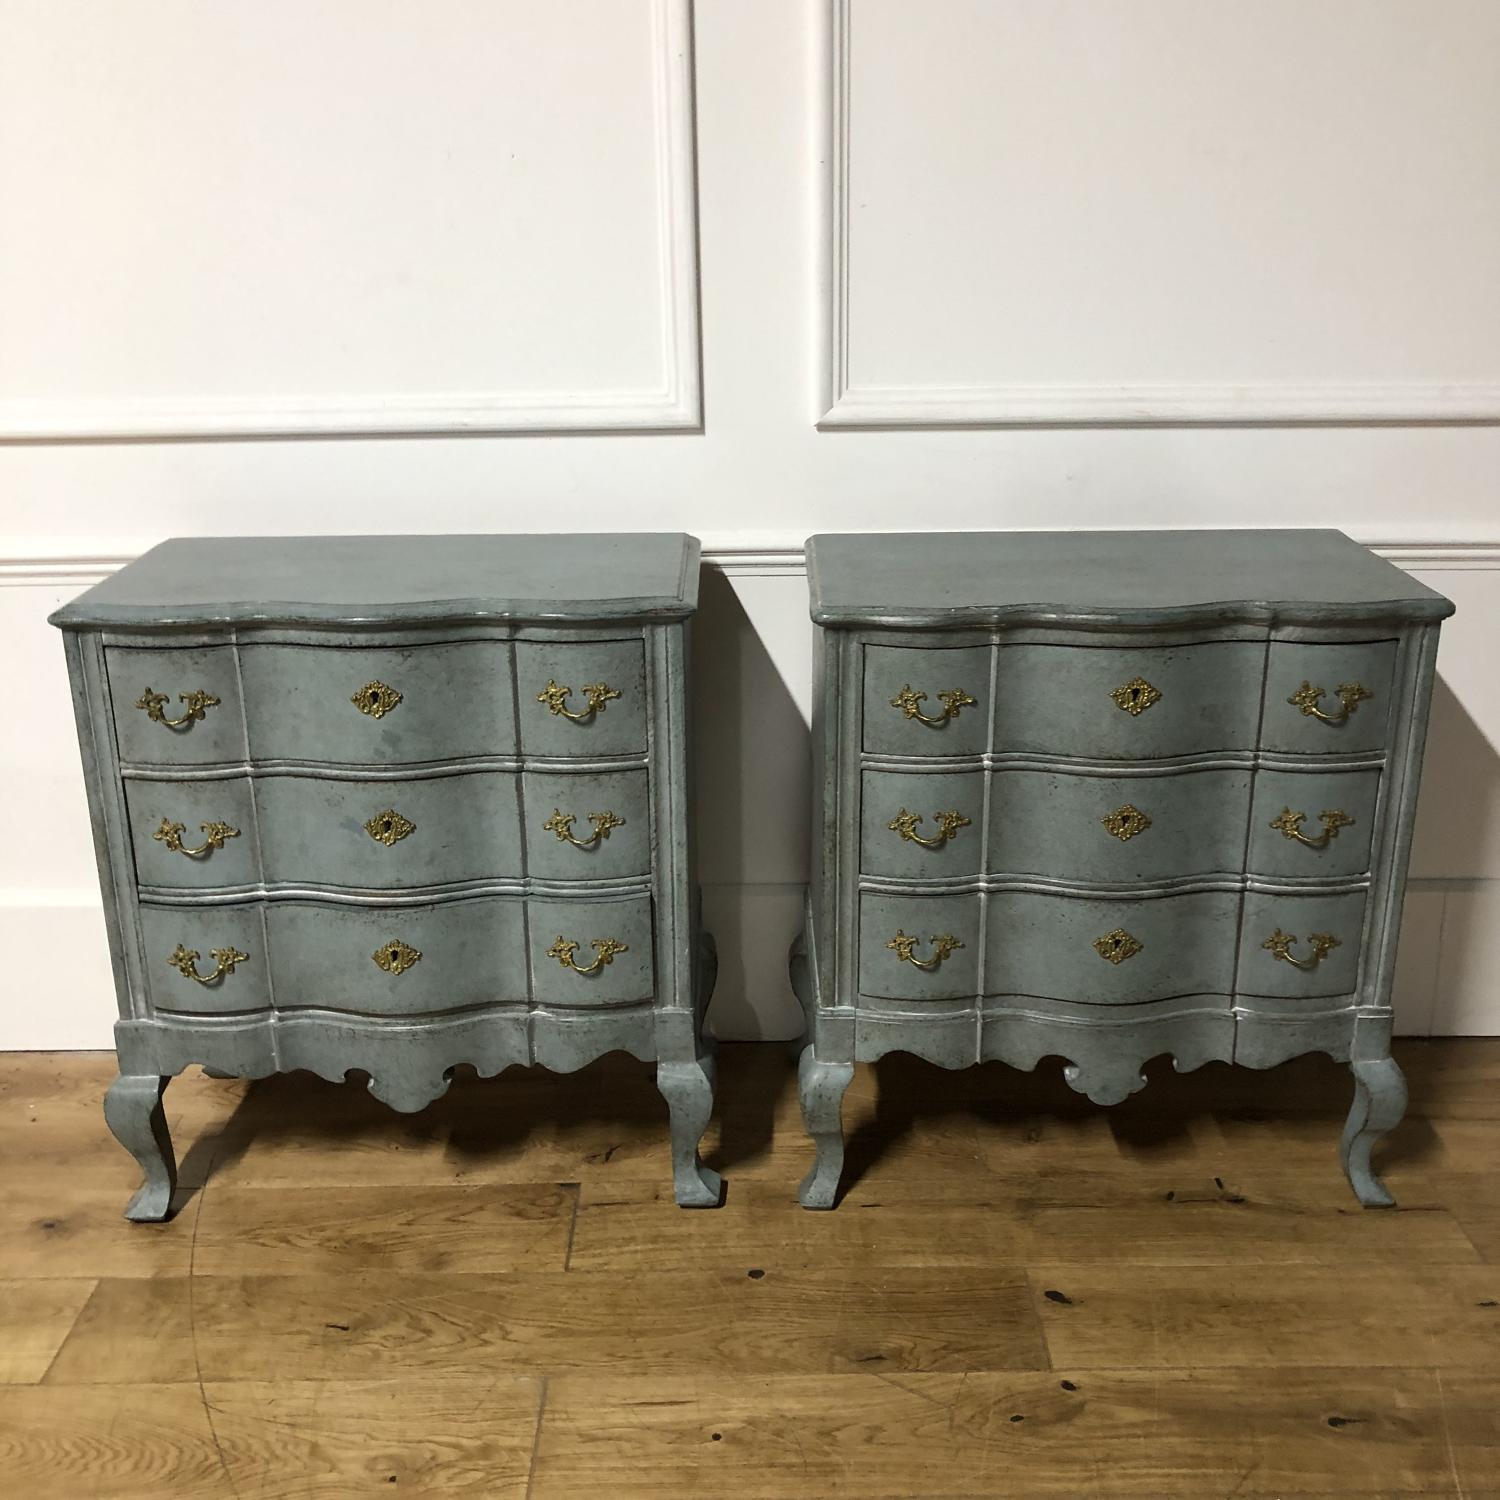 A pair of petite serpentine commodes